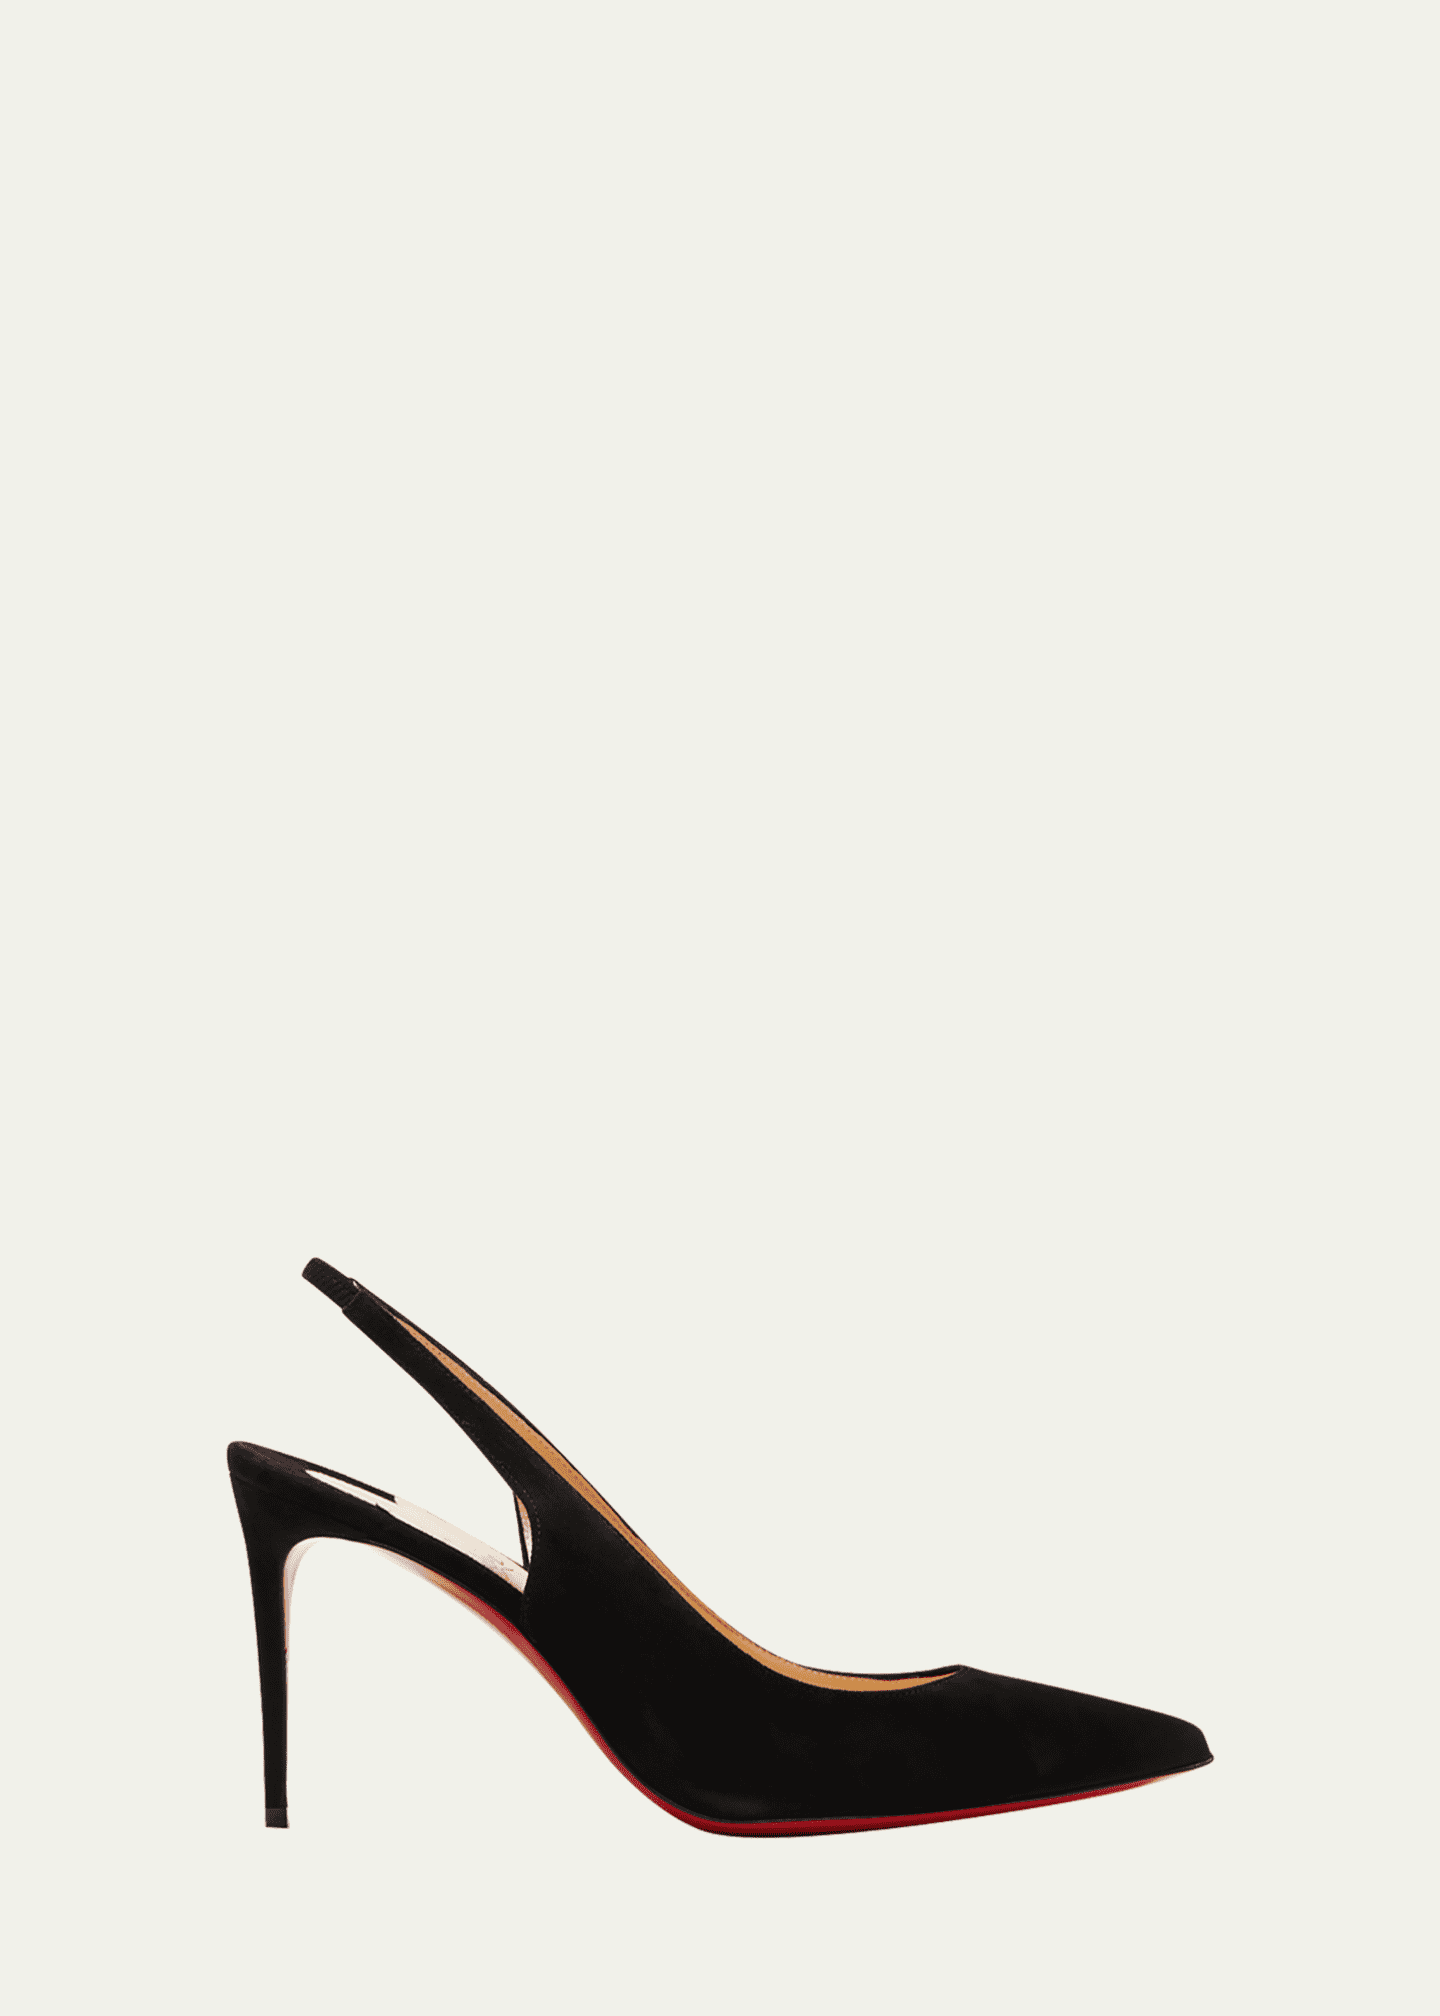 Christian Louboutin Kate Sling Suede Pumps 85 - Red - 37.5